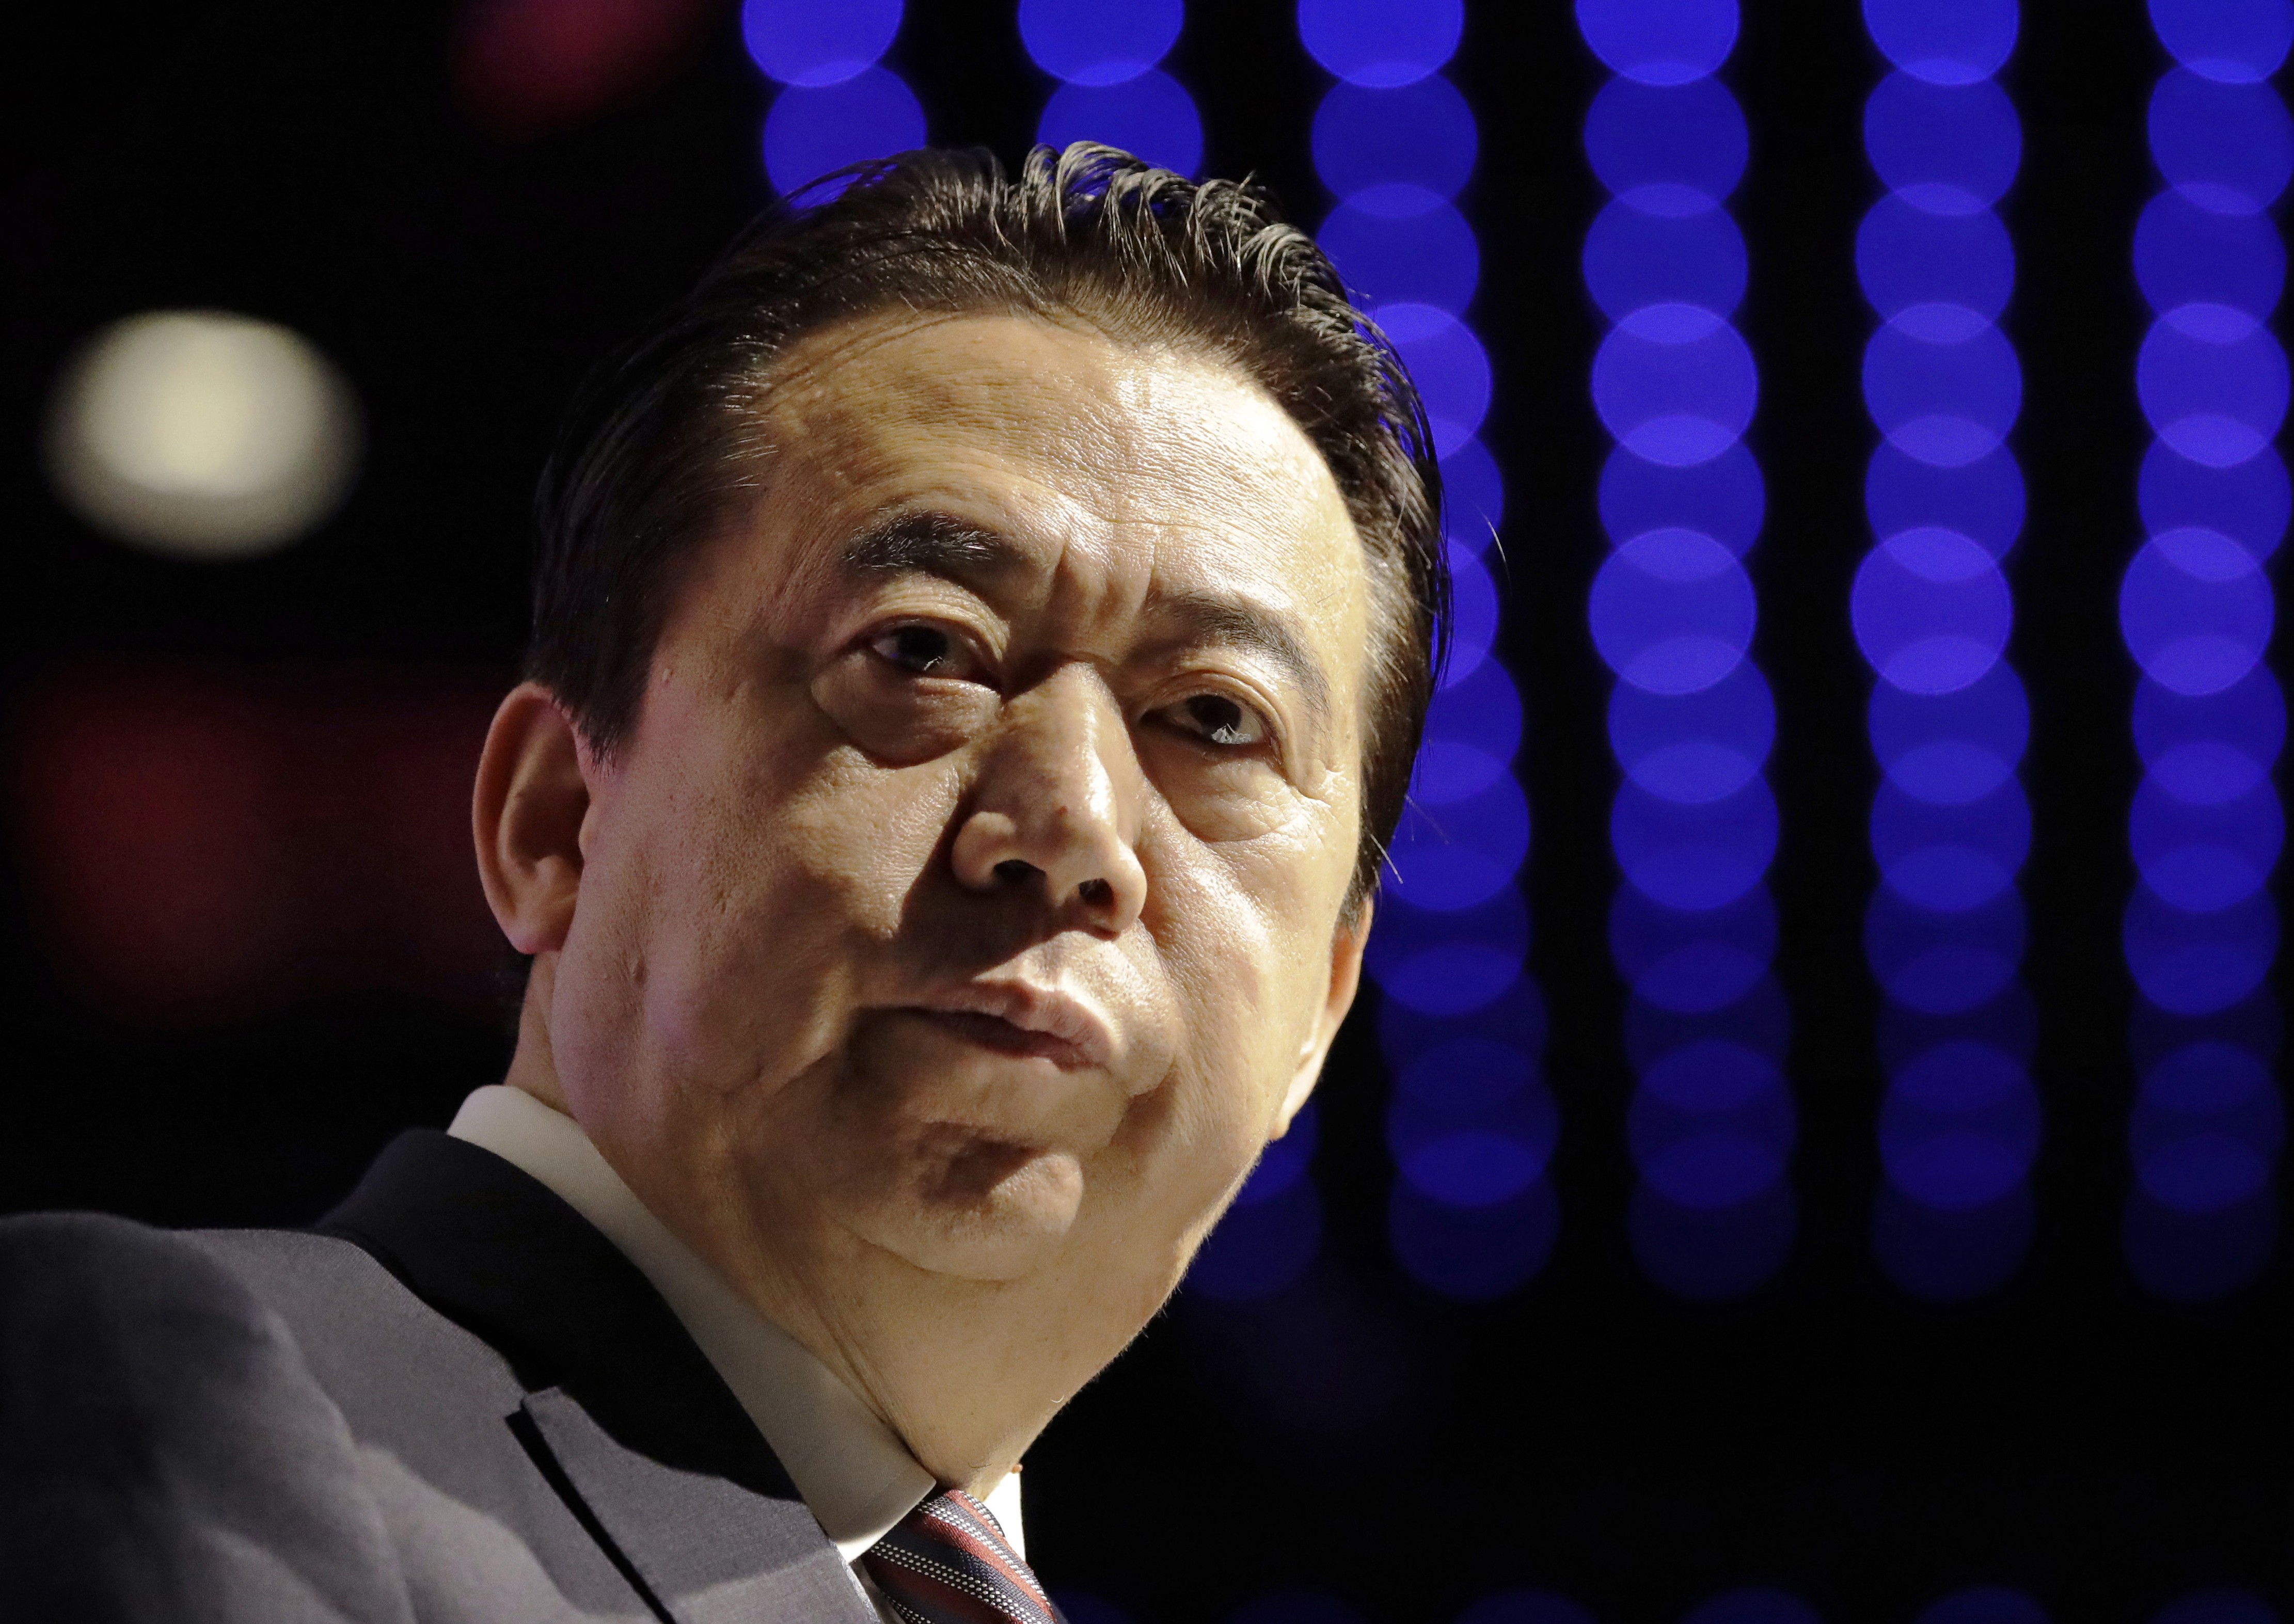 Meng Hongwei, then president of Interpol, gives a speech at the opening of the Interpol World Congress in Singapore in 2017. Two weeks after Meng’s disappearance at the end of September, the Chinese authorities announced that he had been detained. Photo: AFP